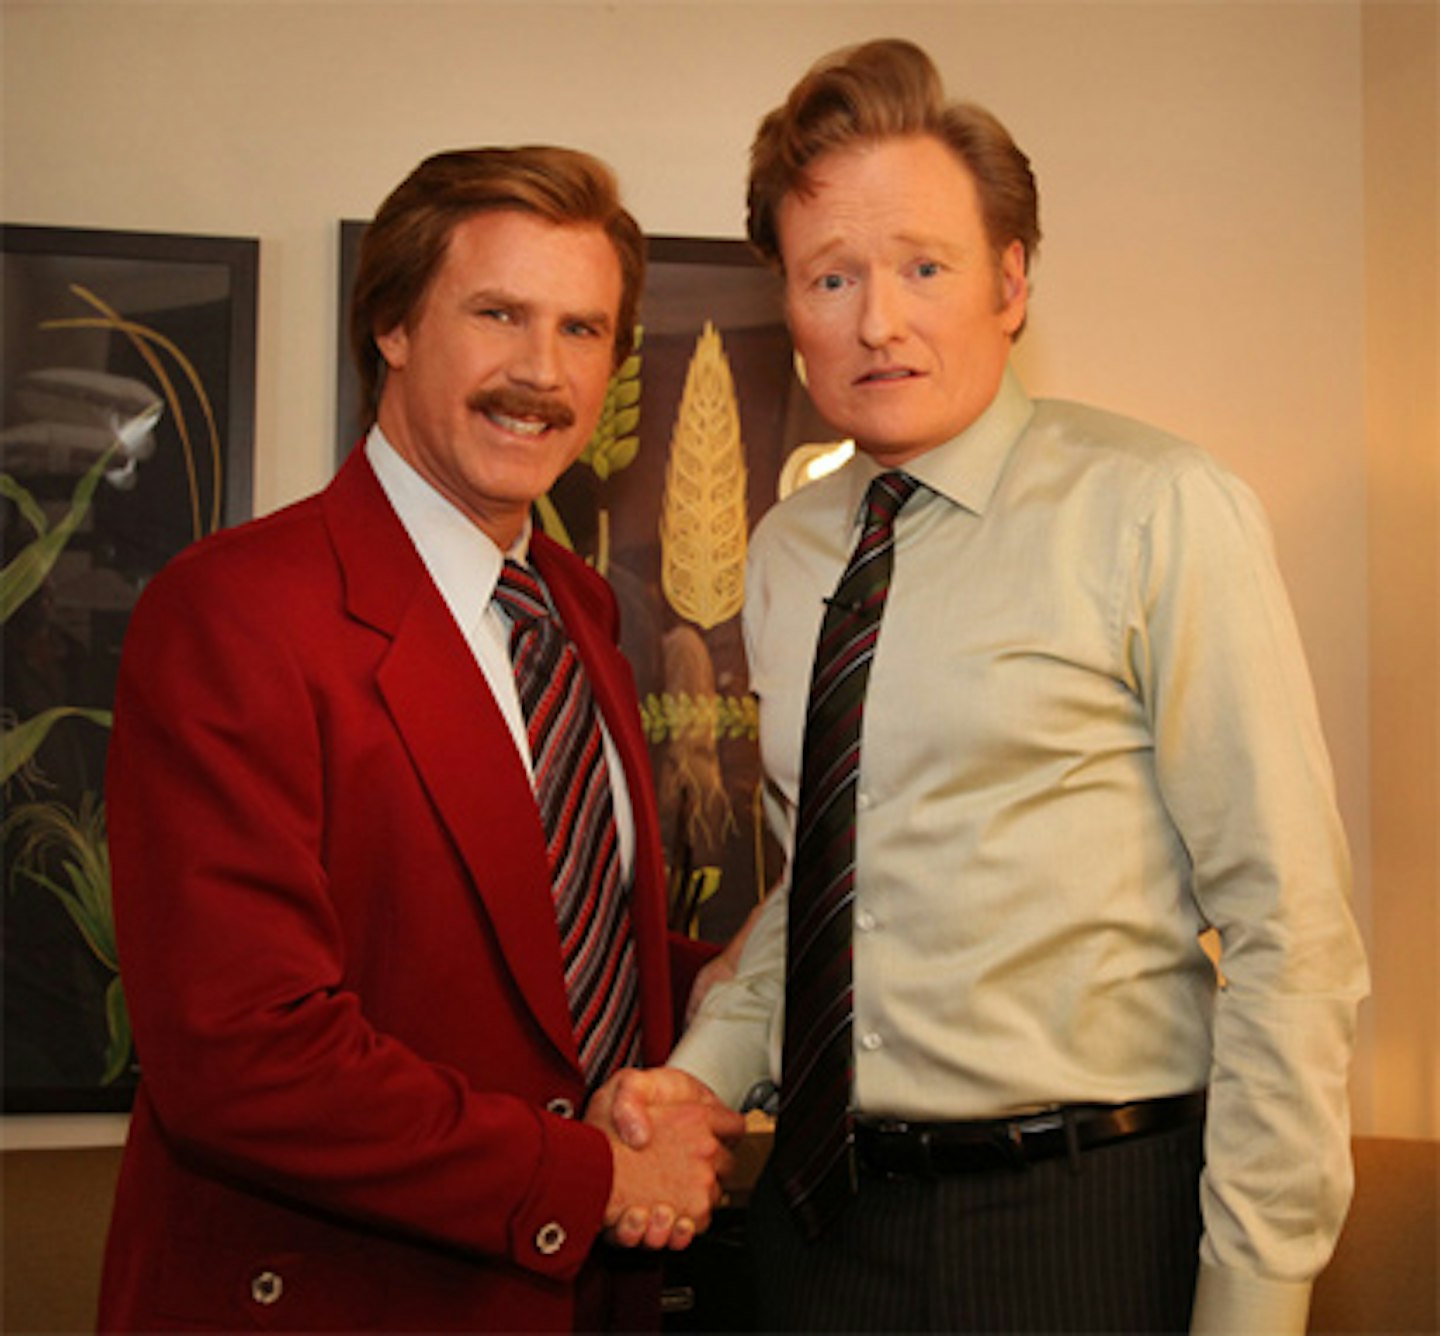 Anchorman 2 Is Official!